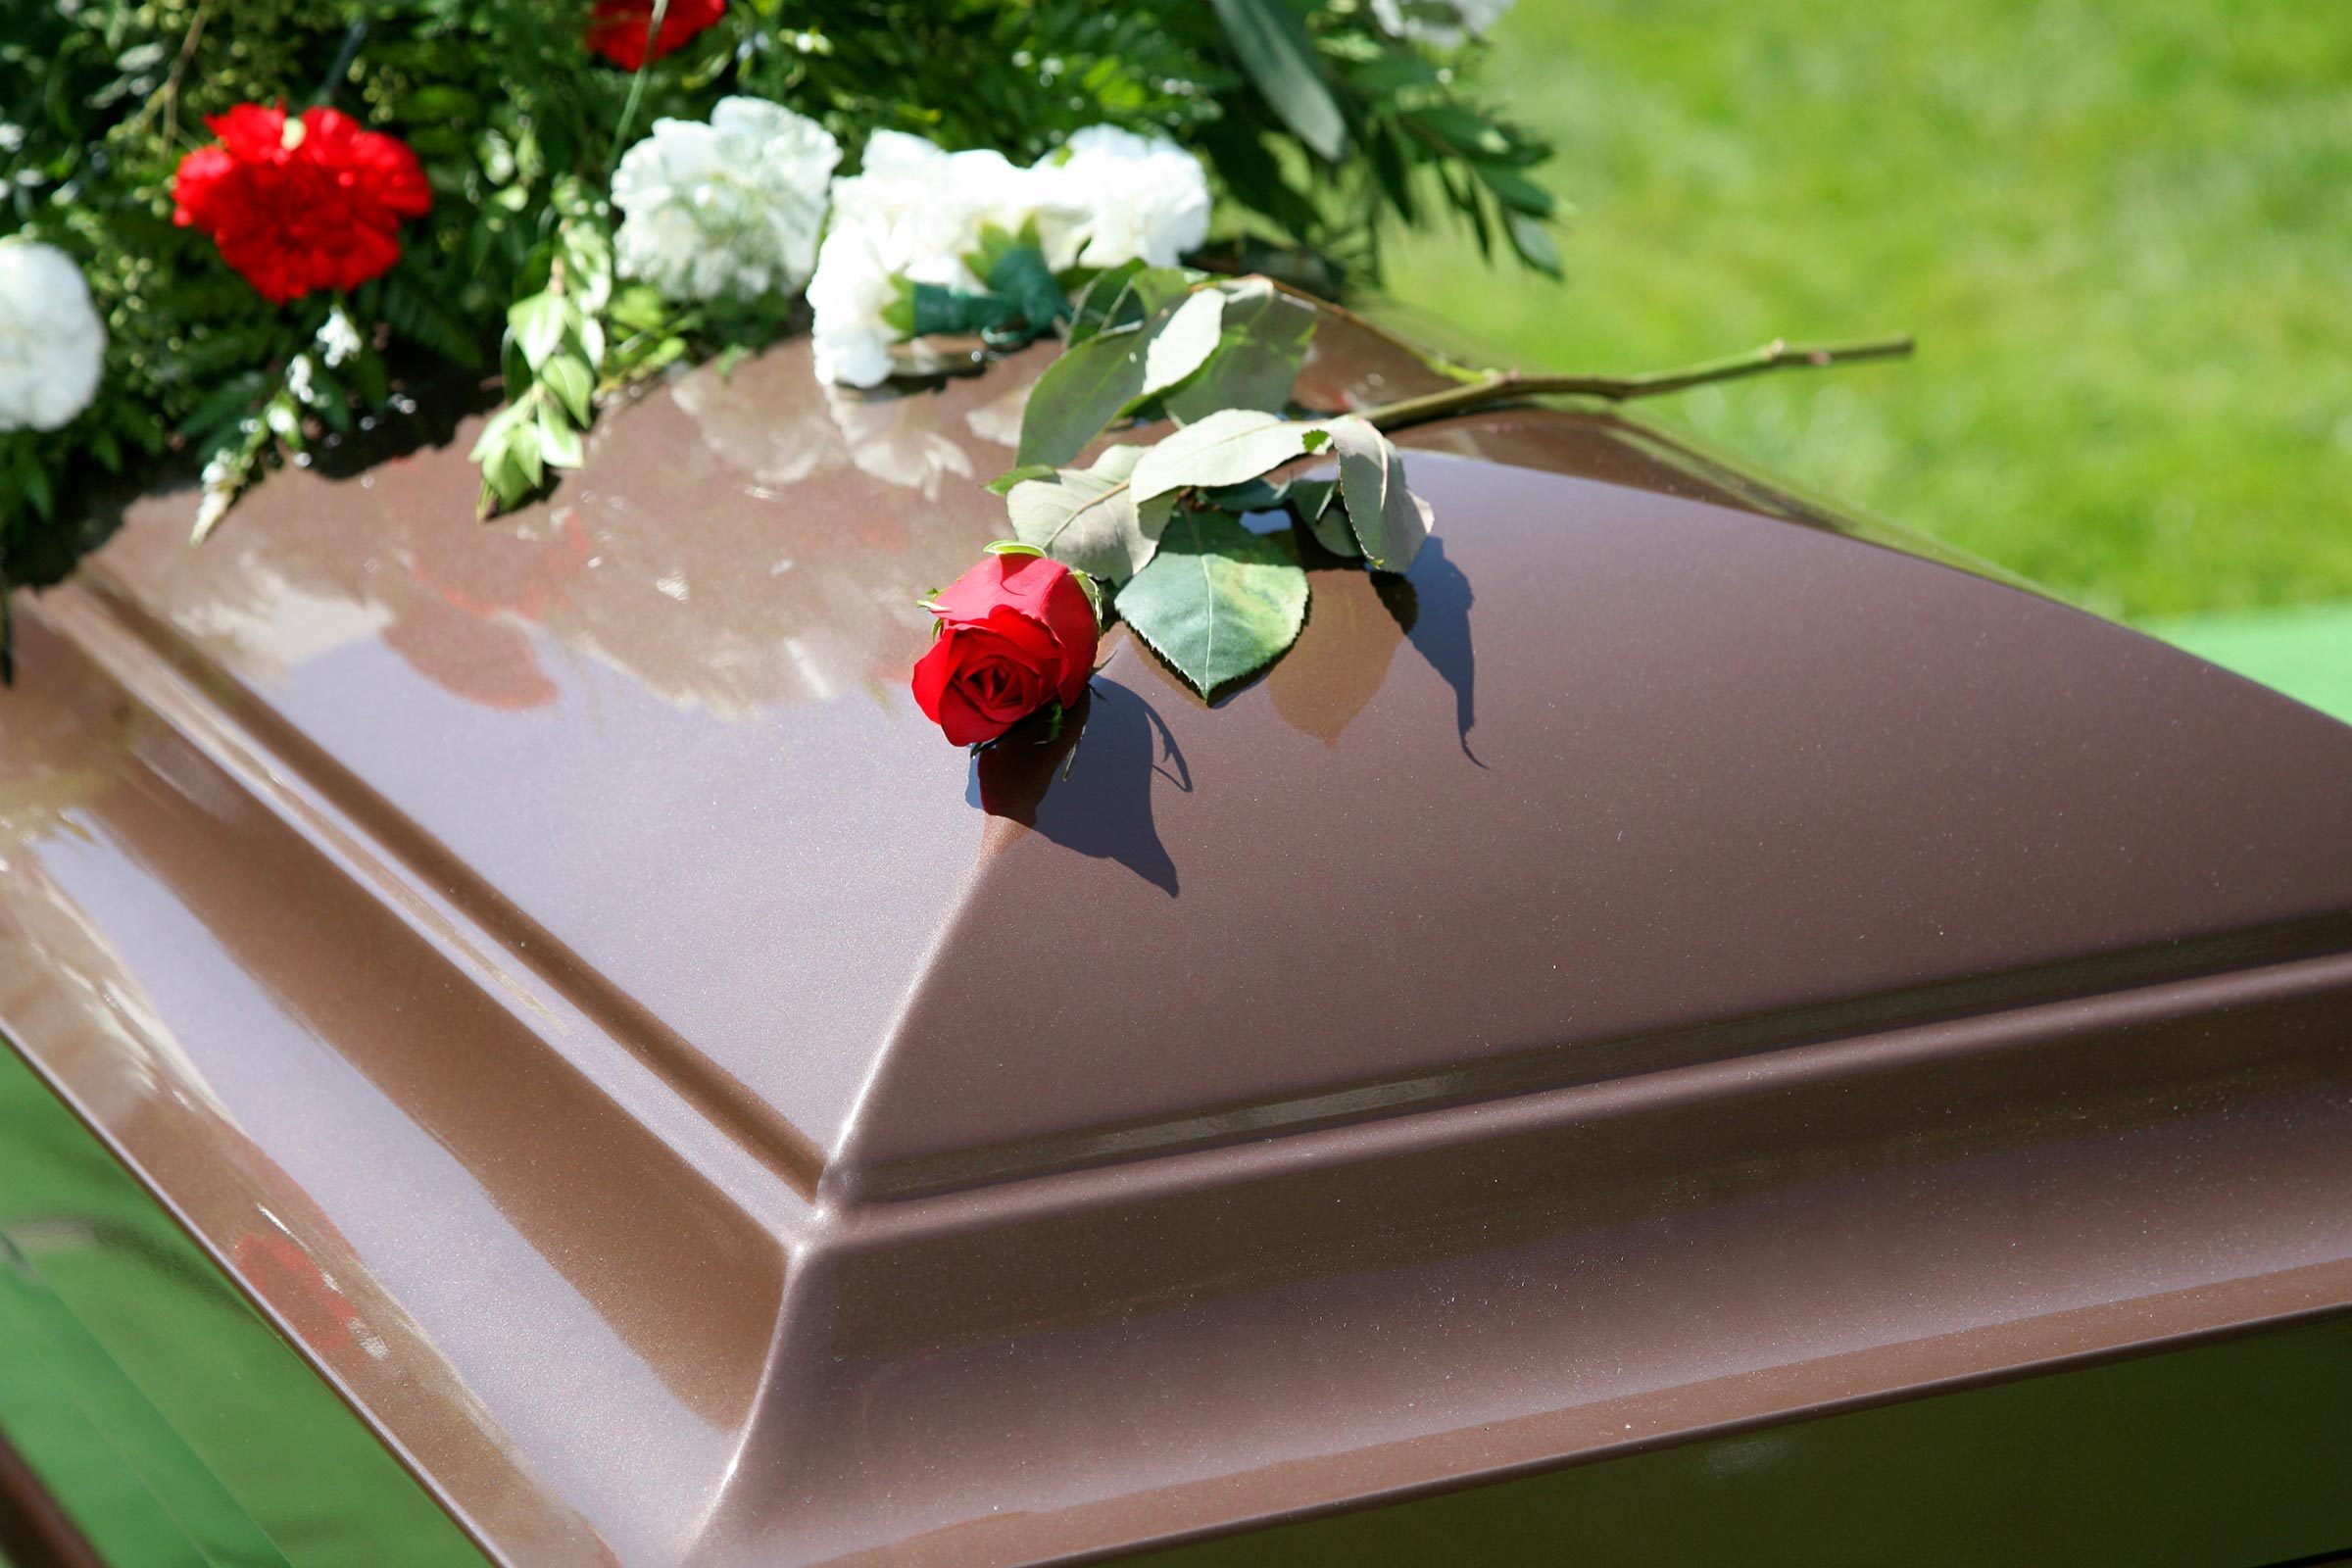 13-things-a-funeral-director-won-t-tell-you-reader-s-digest